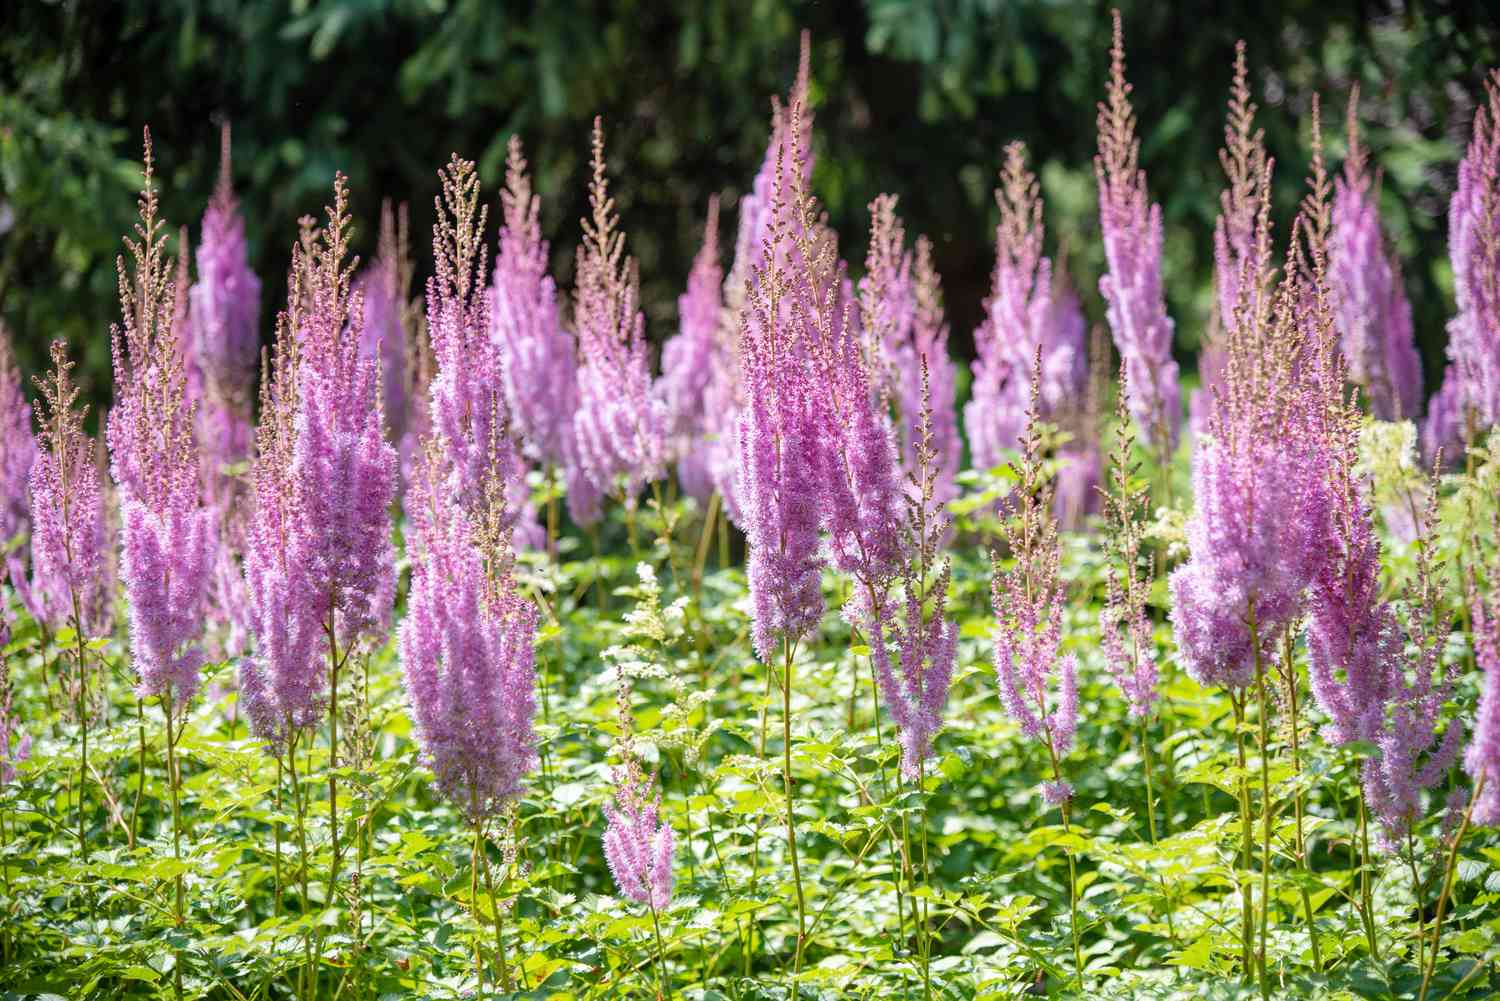 Astilbe plant with fluffy pink flowers in bog garden